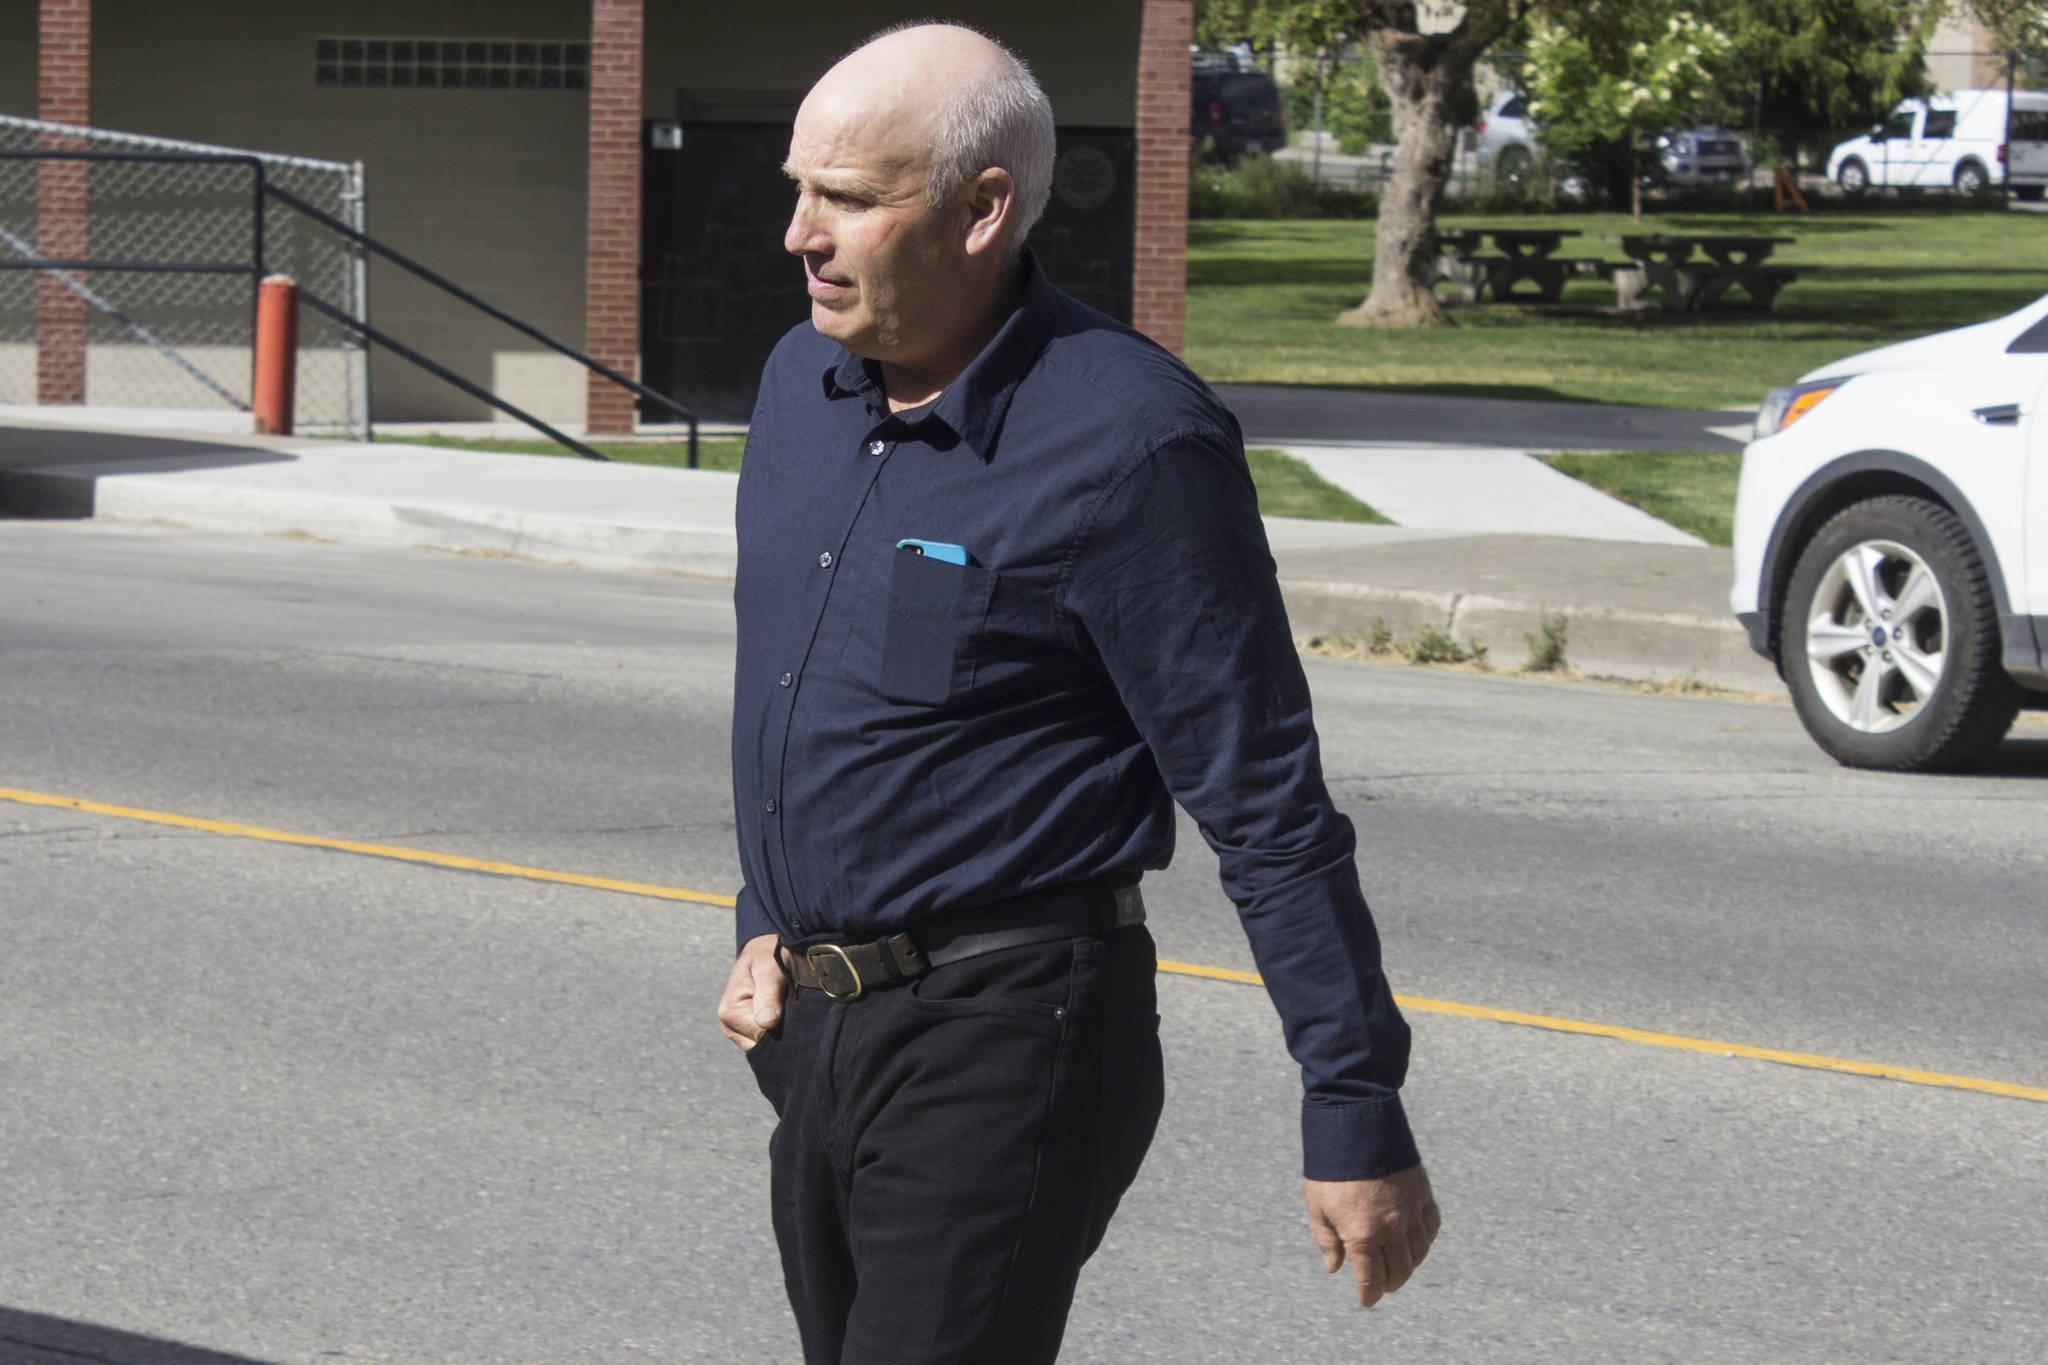 James Marion Oler, who is associated with Bountiful, is on trial for the alleged removal of a child from Canada.